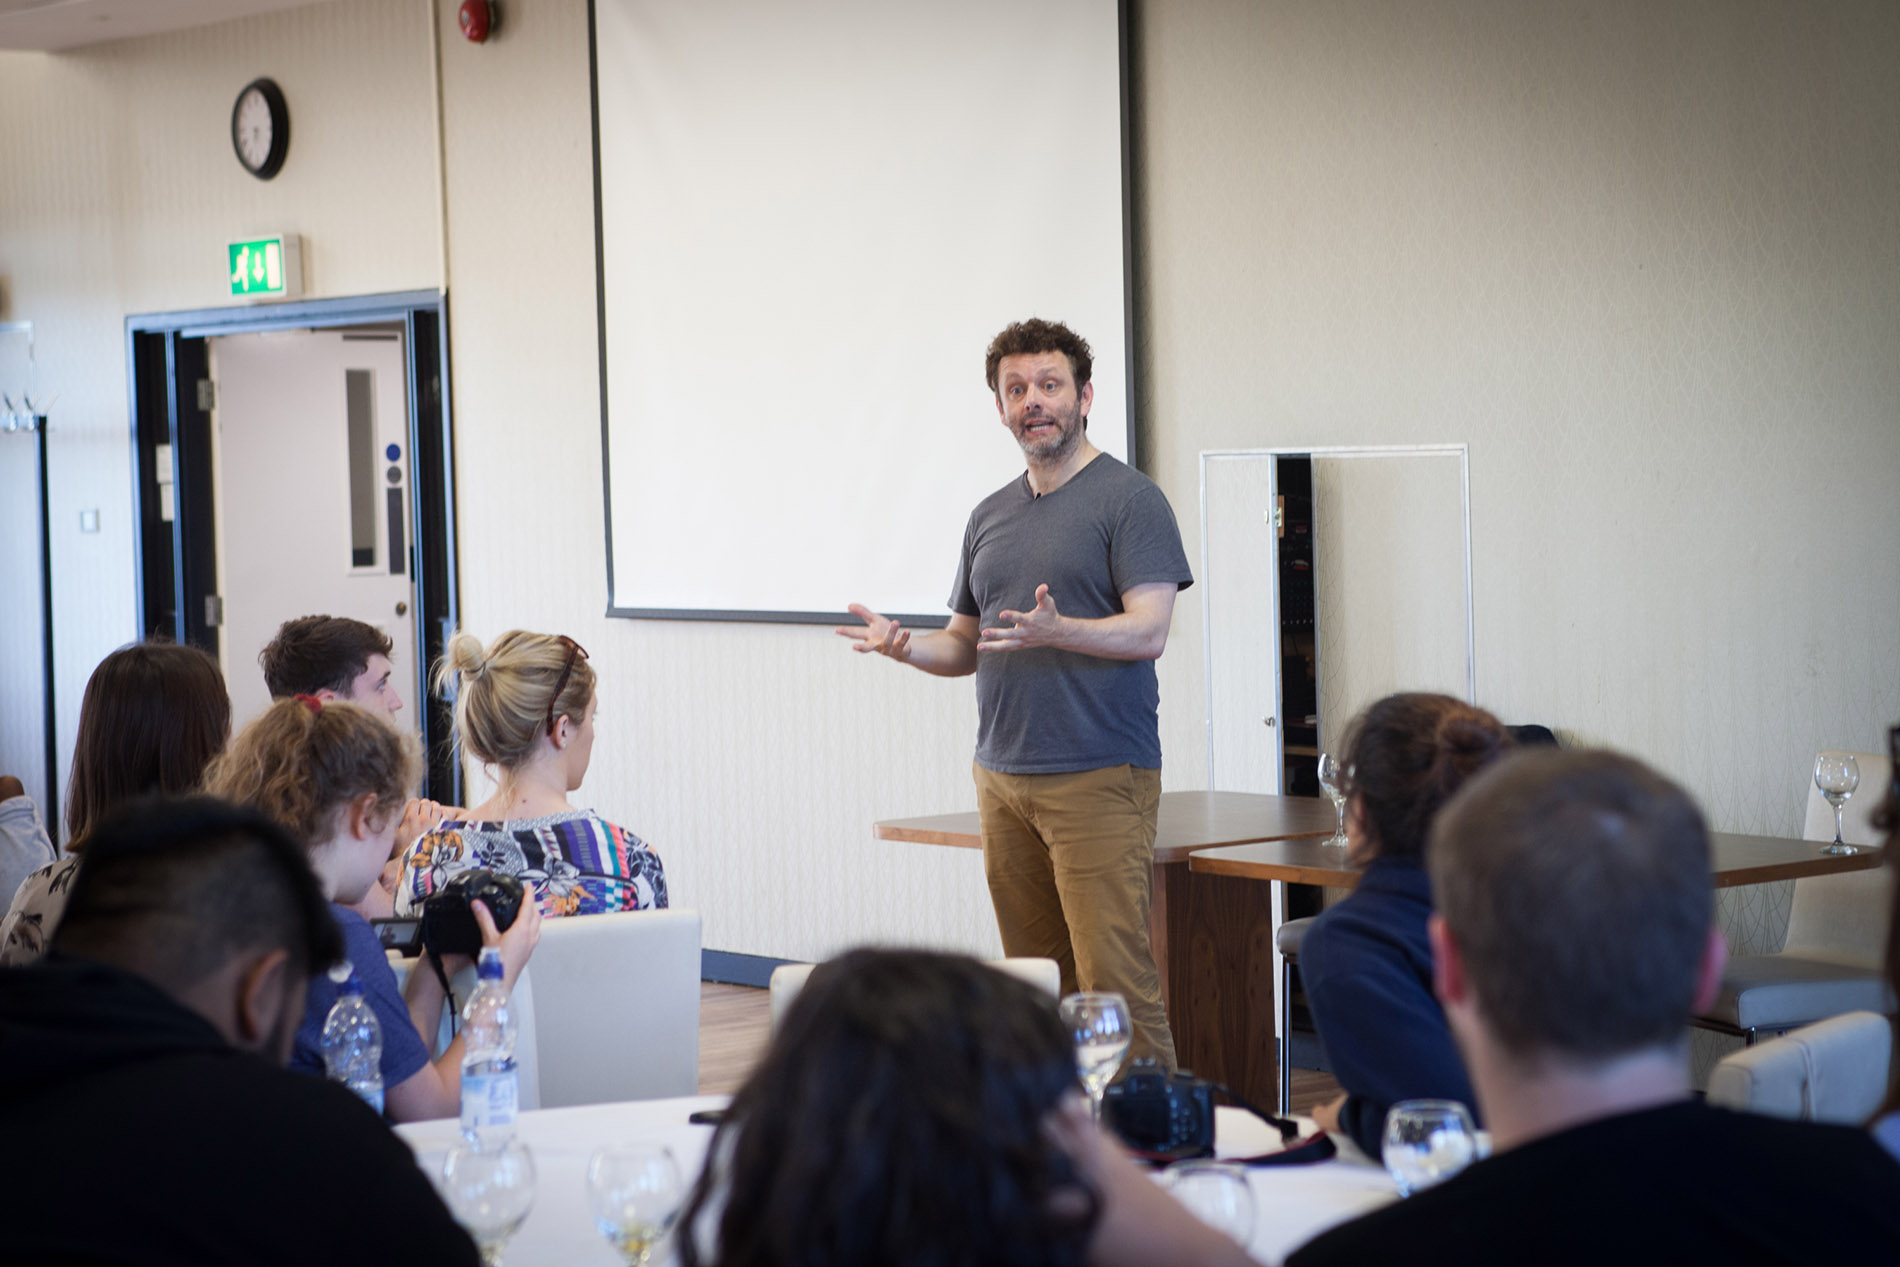 Michael Sheen leads a session on place based change - Drivers for Change 2018